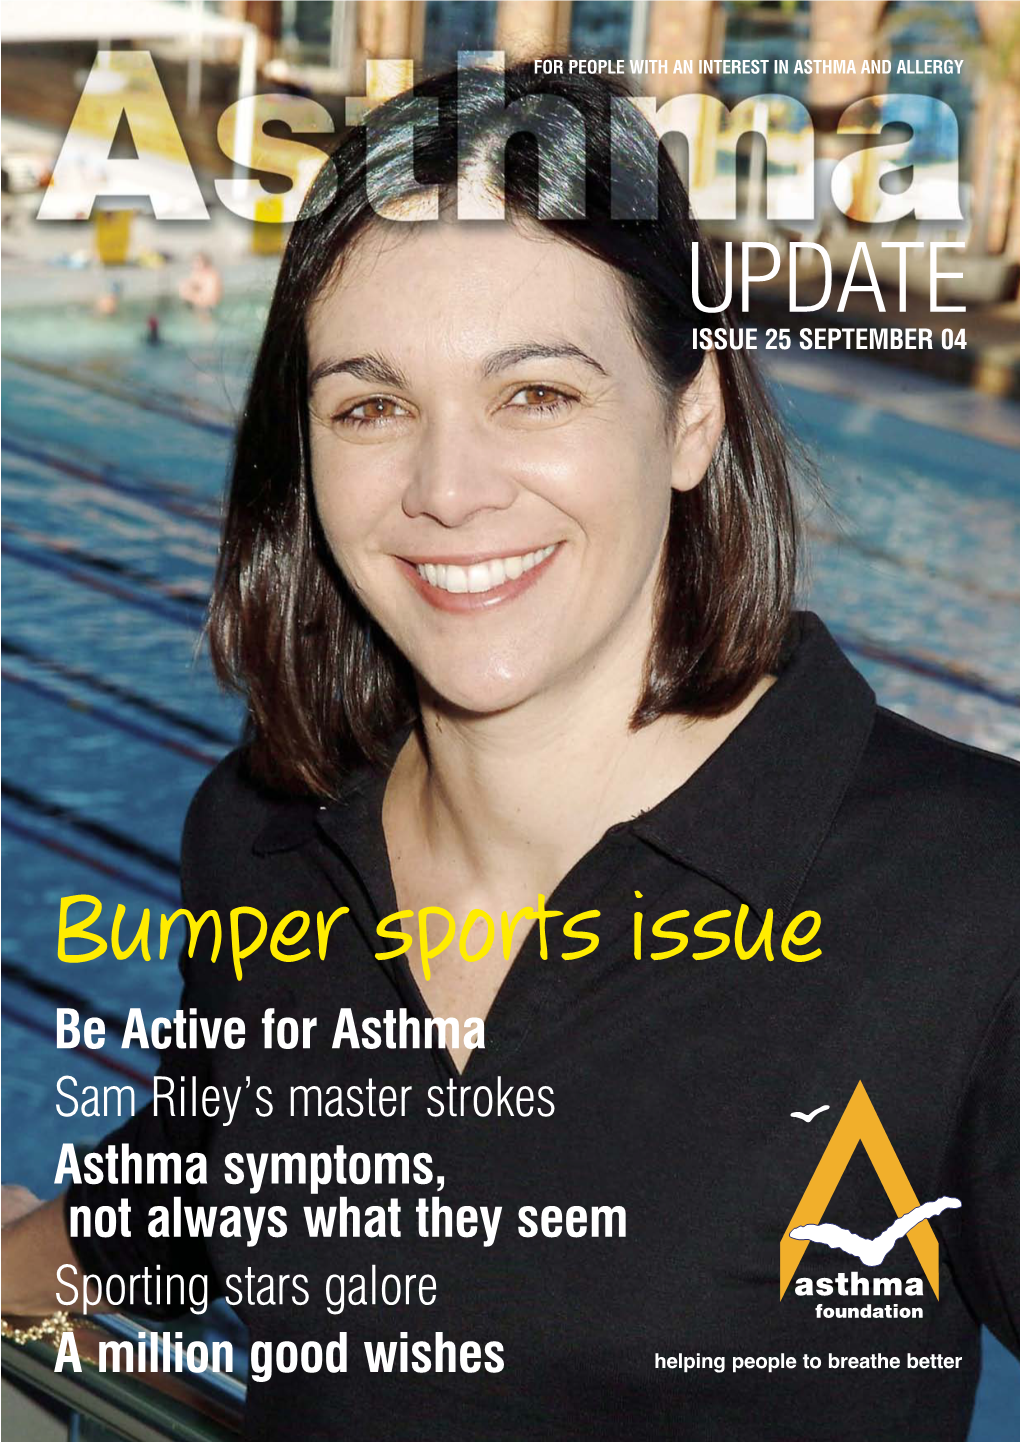 Bumper Sports Issue Be Active for Asthma Sam Riley’S Master Strokes Asthma Symptoms, Not Always What They Seem Sporting Stars Galore